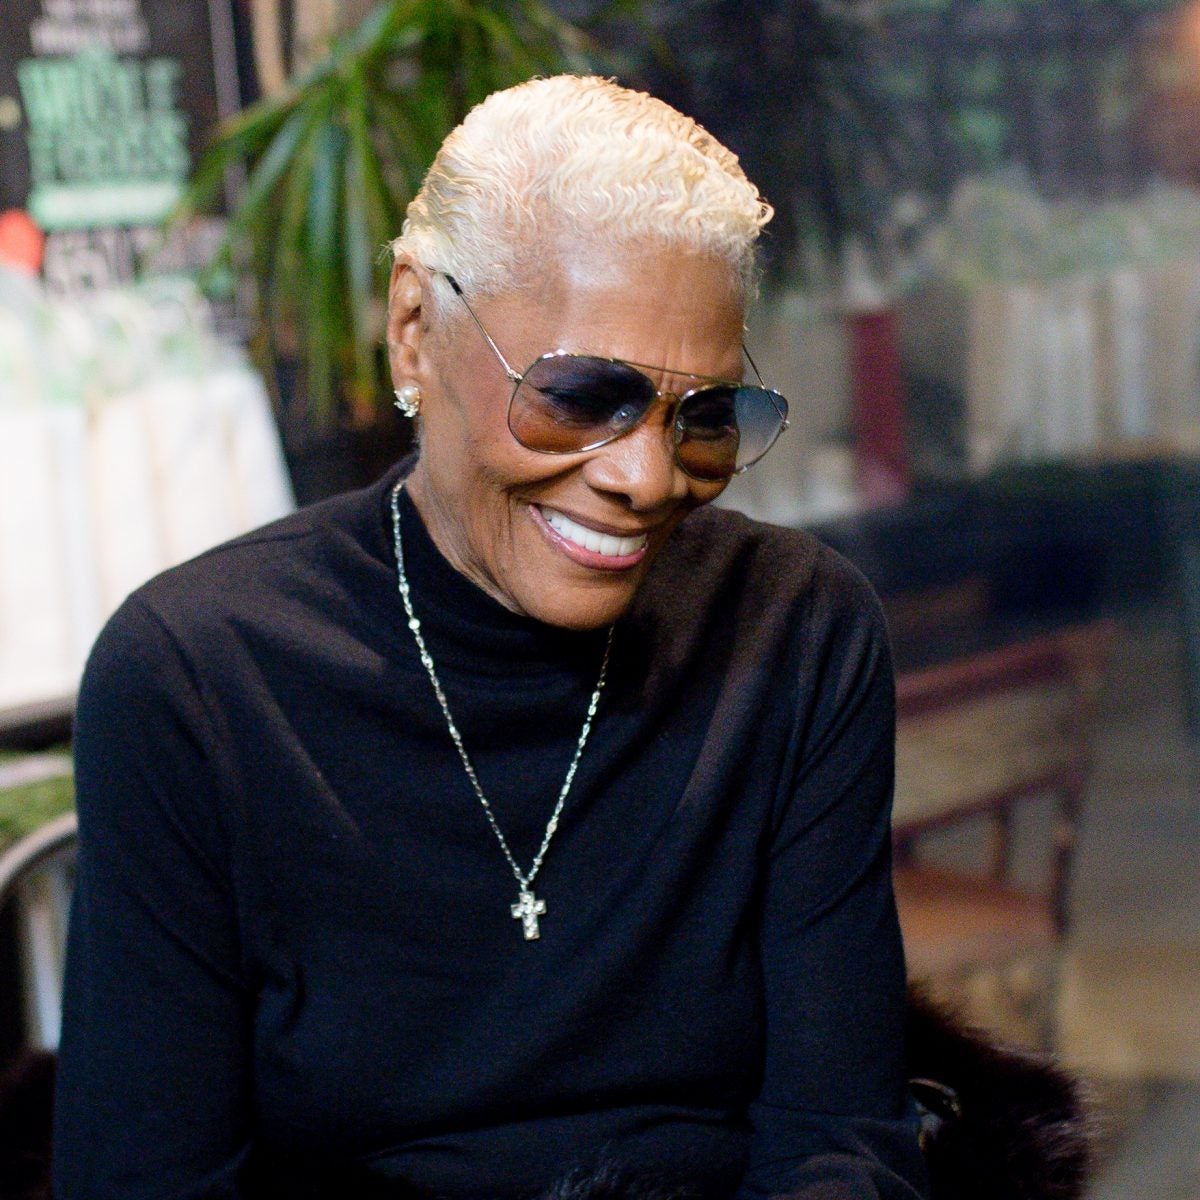 Dionne Warwick Rules Twitter, Pokes Fun At Chance The Rapper And The Weeknd Over Their Names